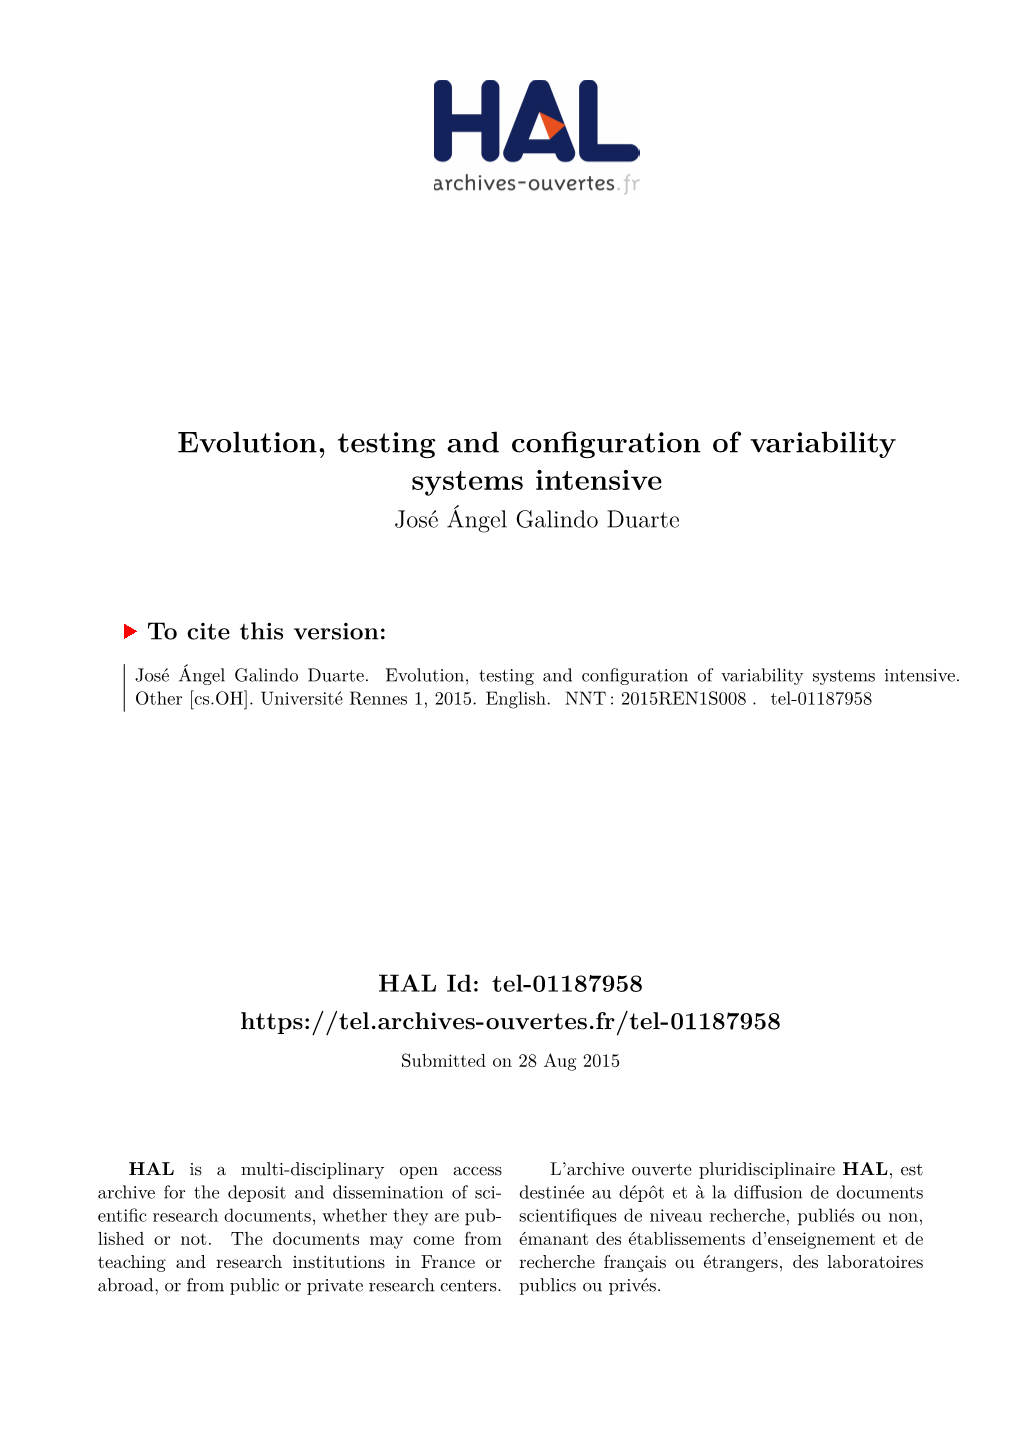 Evolution, Testing and Configuration of Variability Systems Intensive José Ángel Galindo Duarte